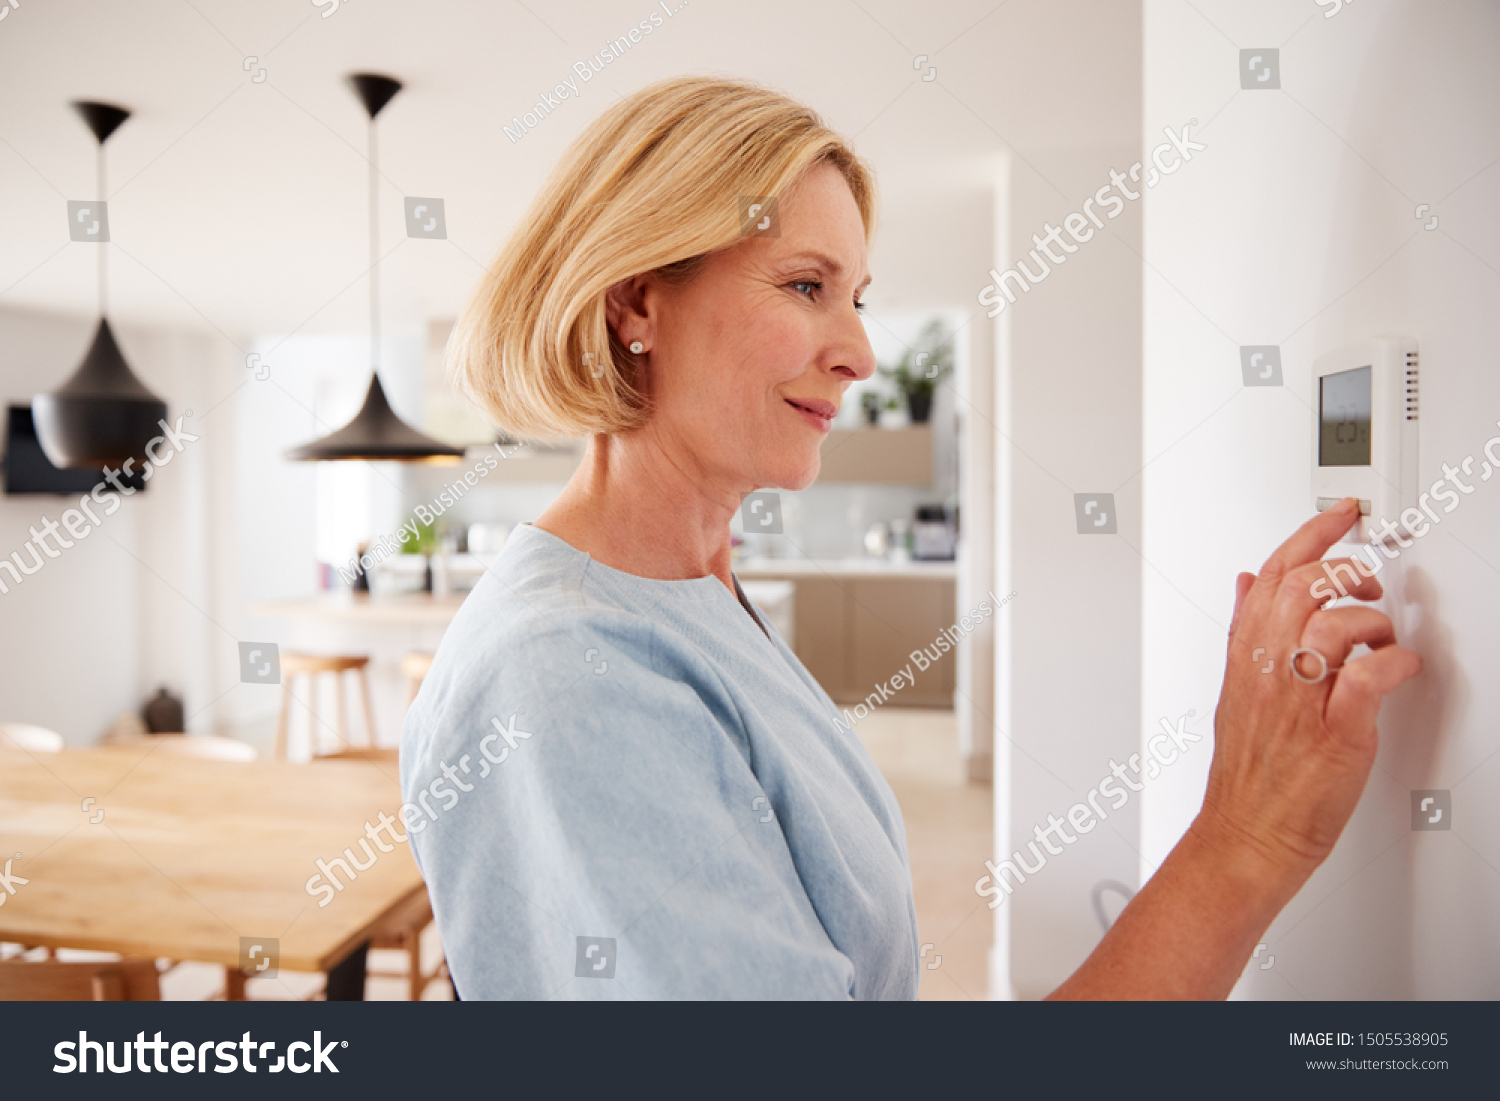 Close Up Of Mature Woman Adjusting Central Heating Temperature At Home On Thermostat #1505538905